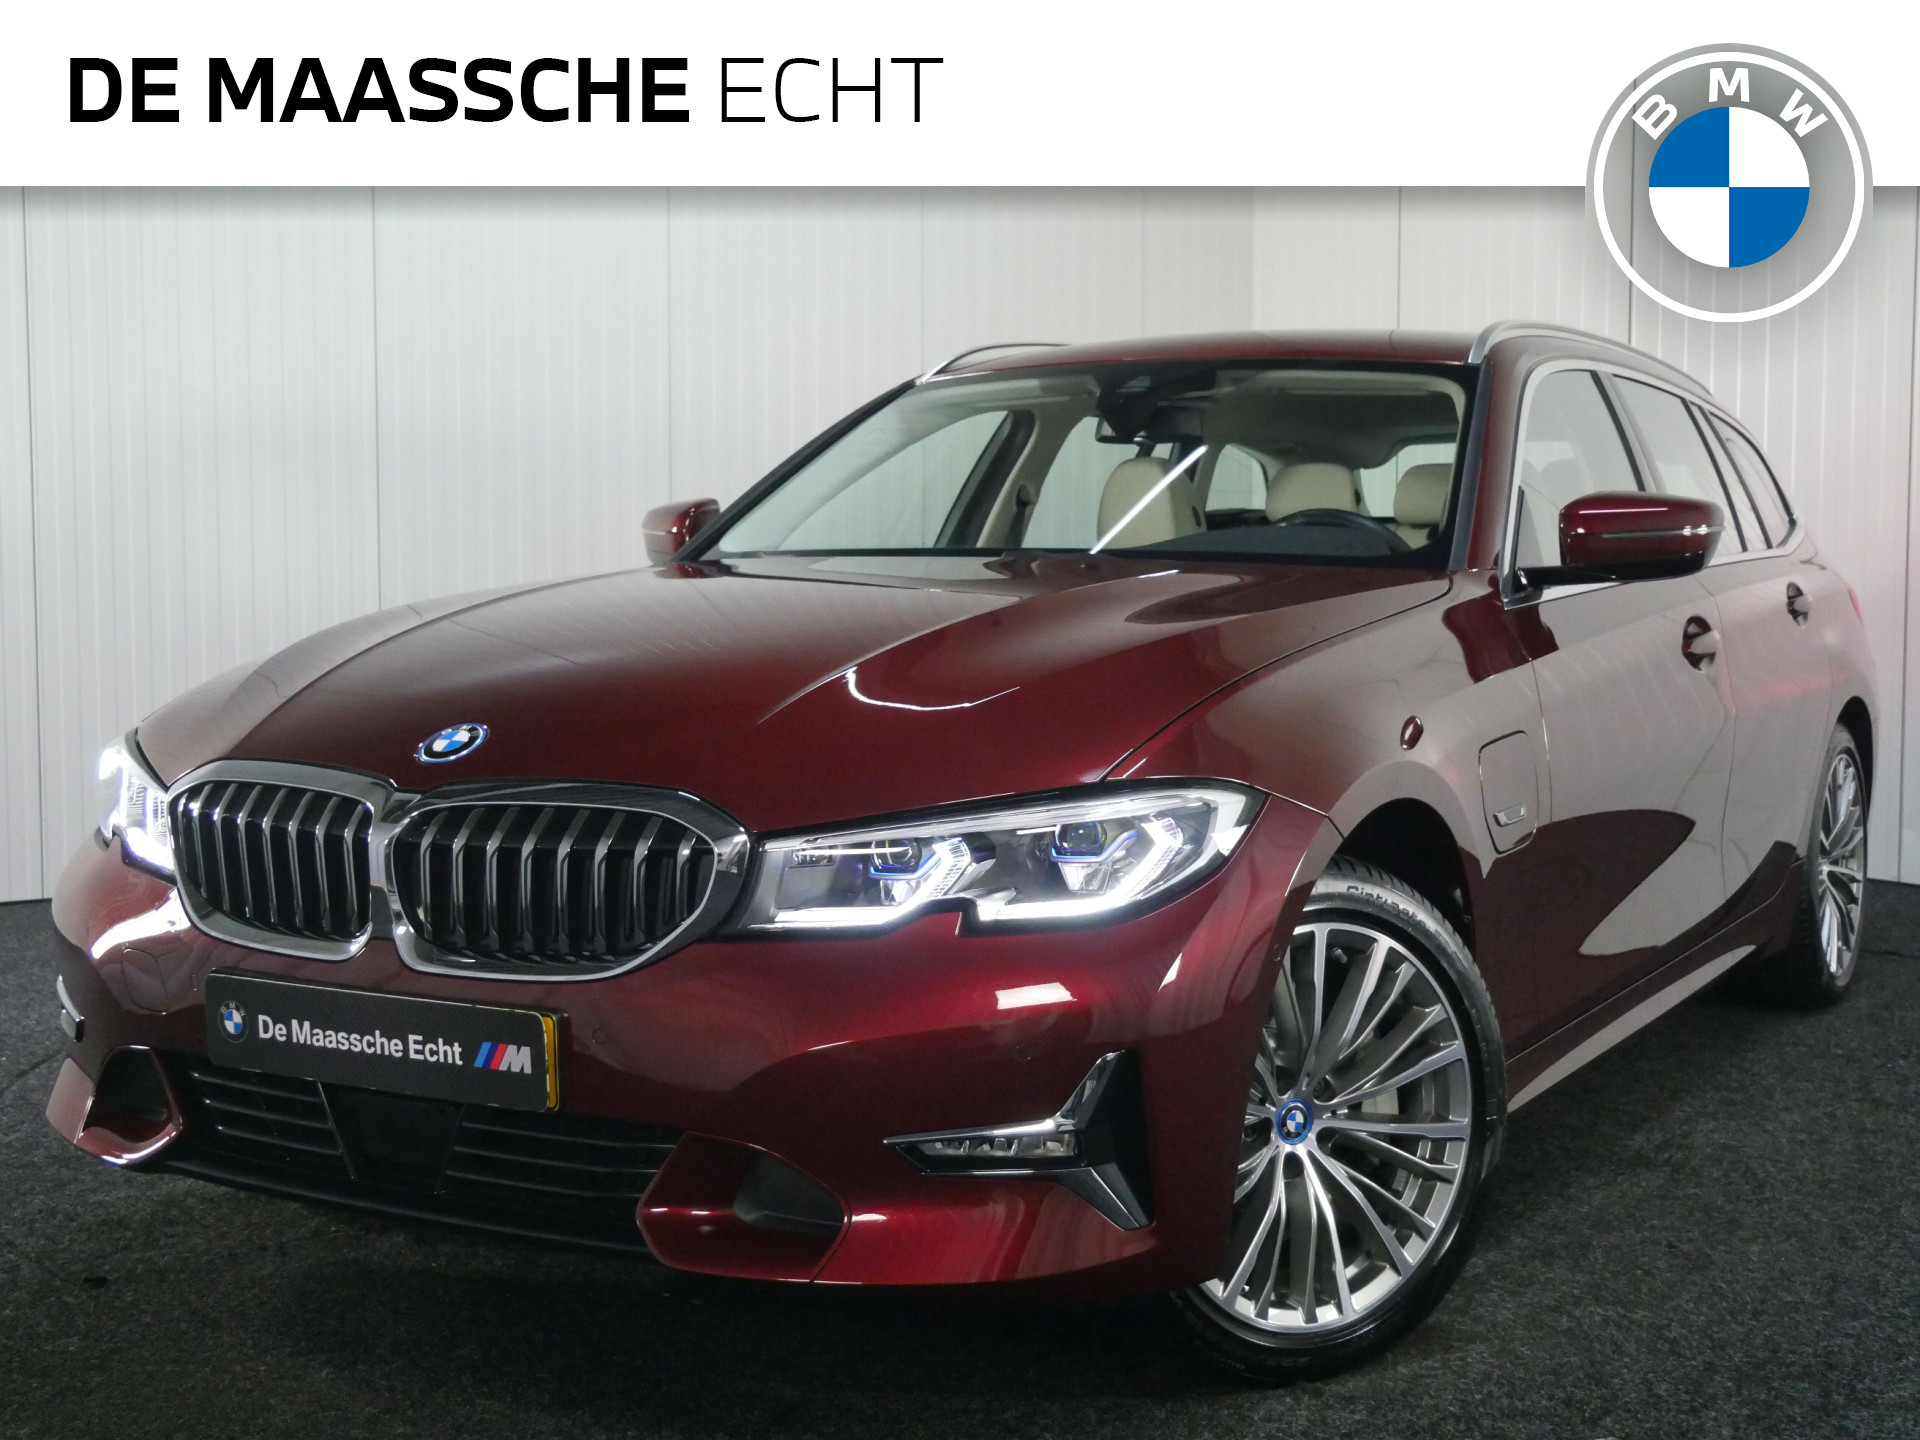 BMW 3 Serie Touring 330e xDrive High Executive Luxury Line Automaat / Laserlight / Sportstoelen / Active Cruise Control  / Live Cockpit Professional / Parking Assistant bij viaBOVAG.nl